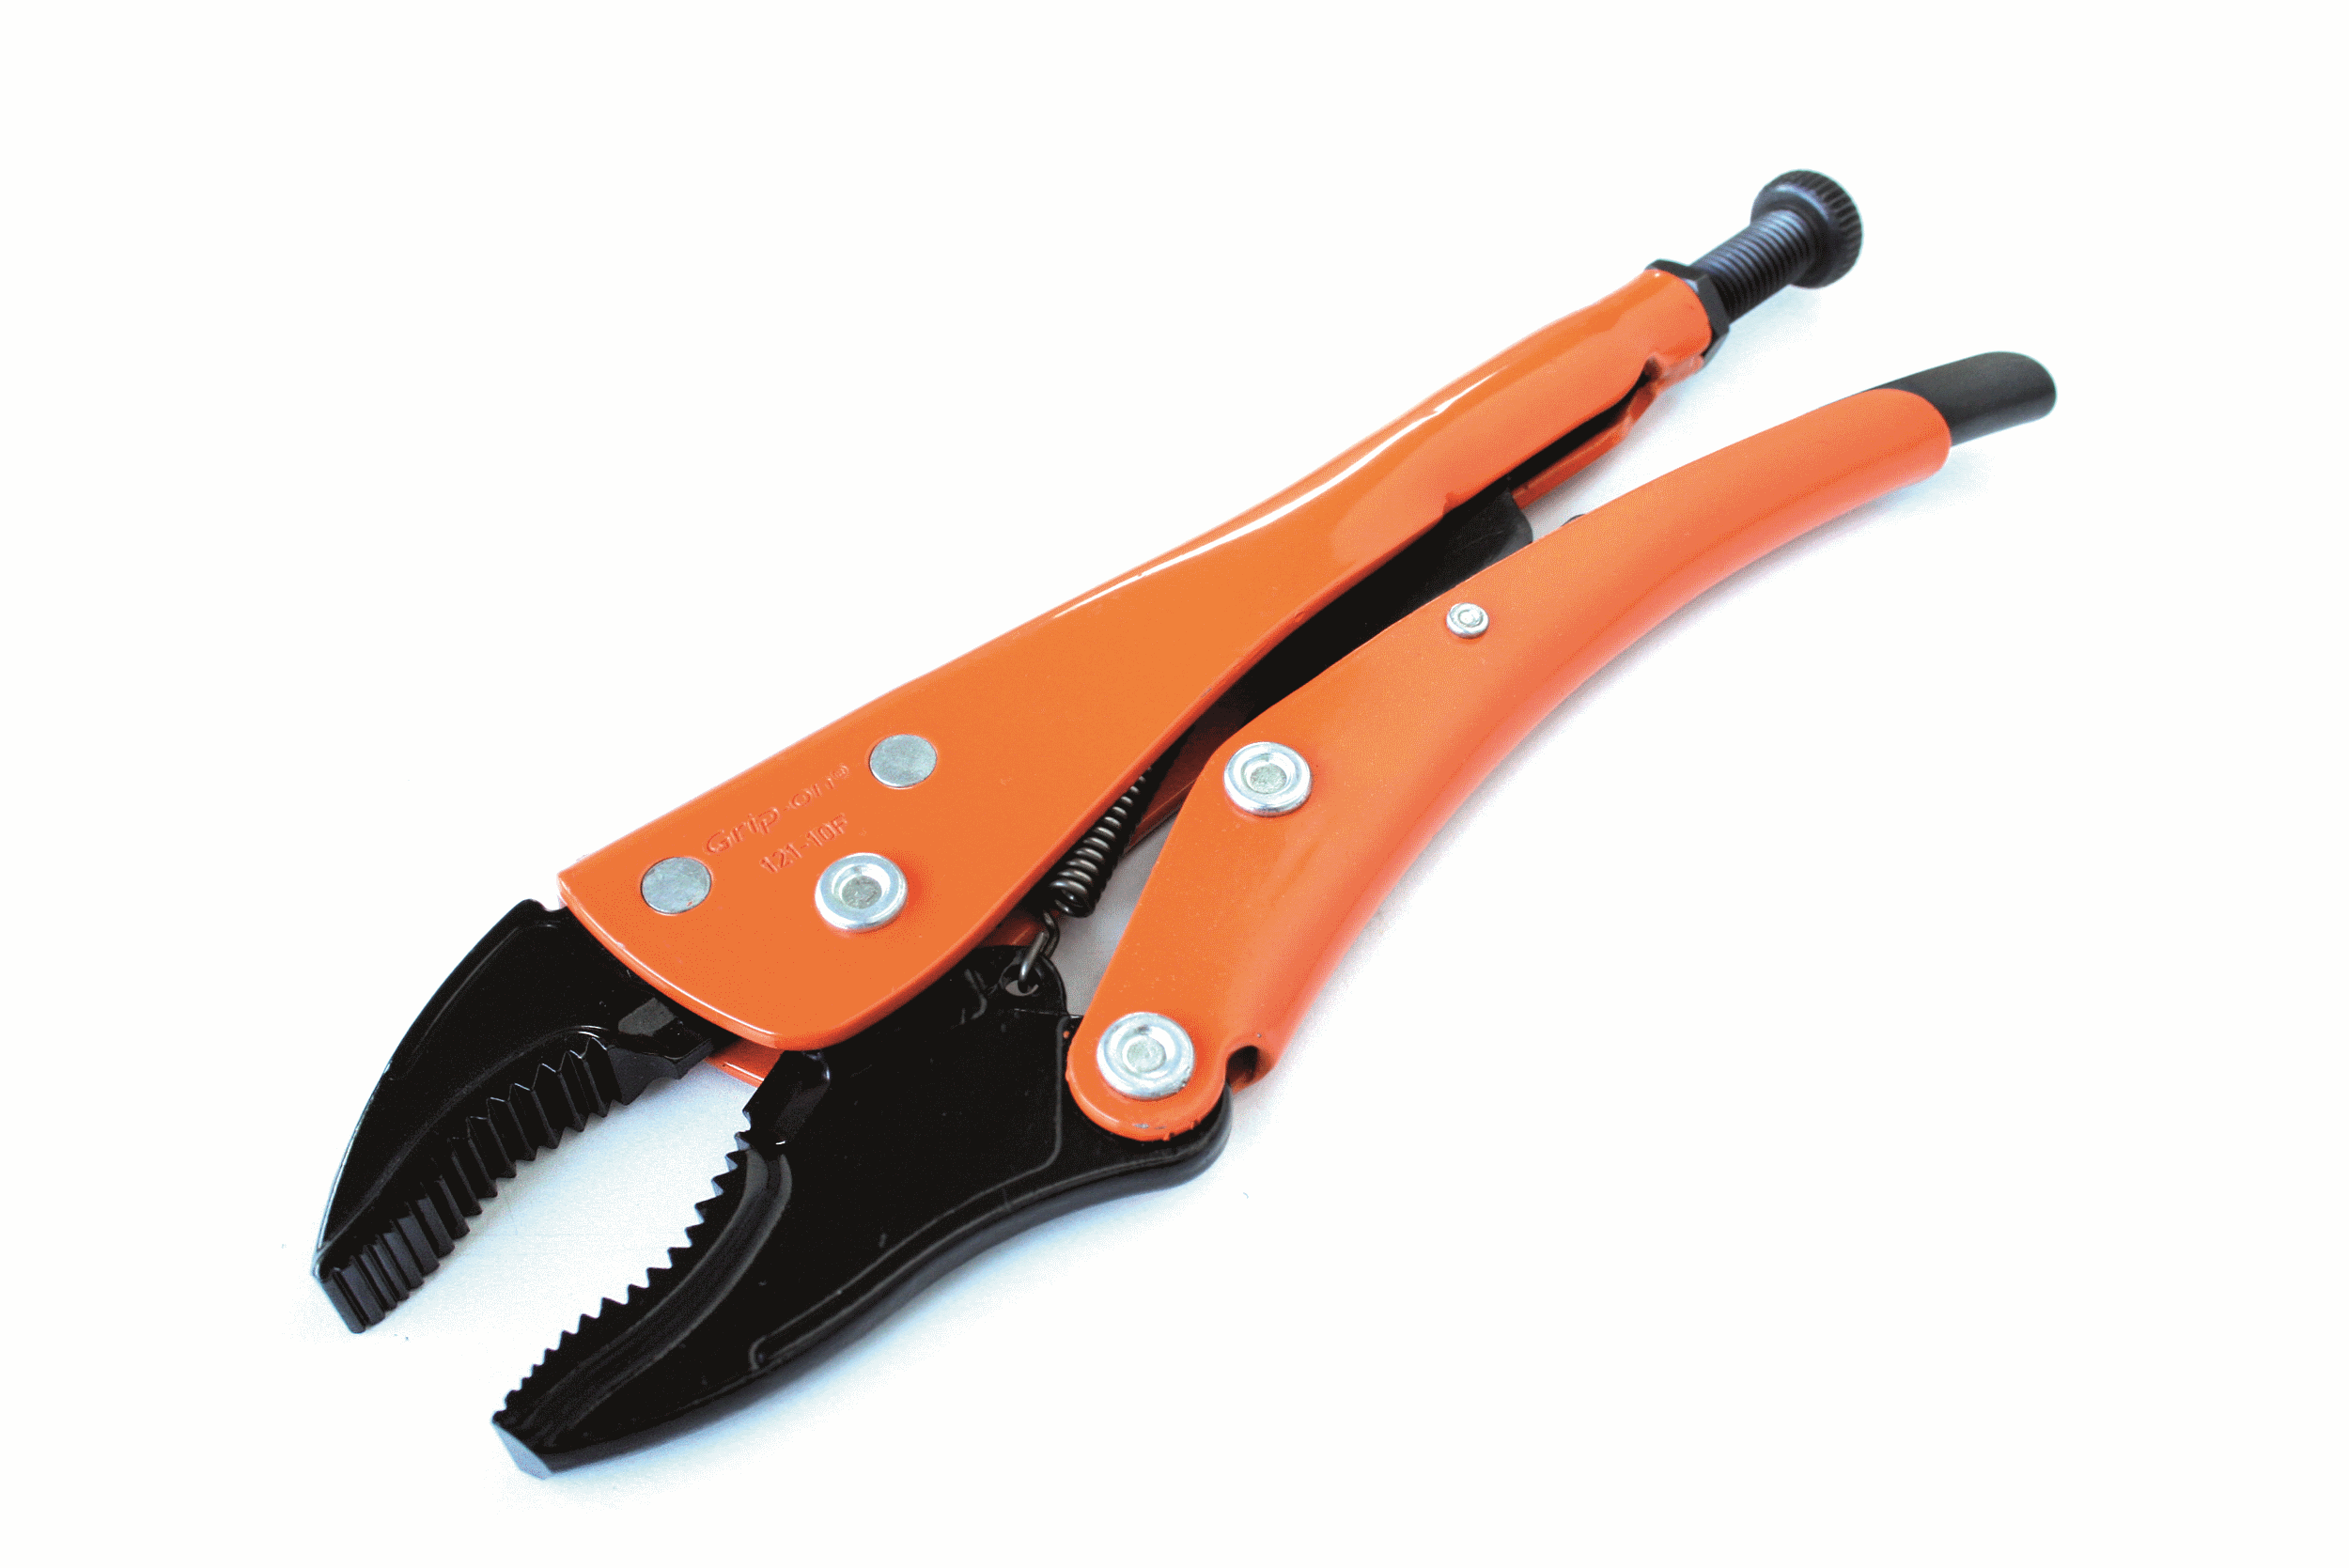 GRIP-ON Rounded jaws with wire cutters